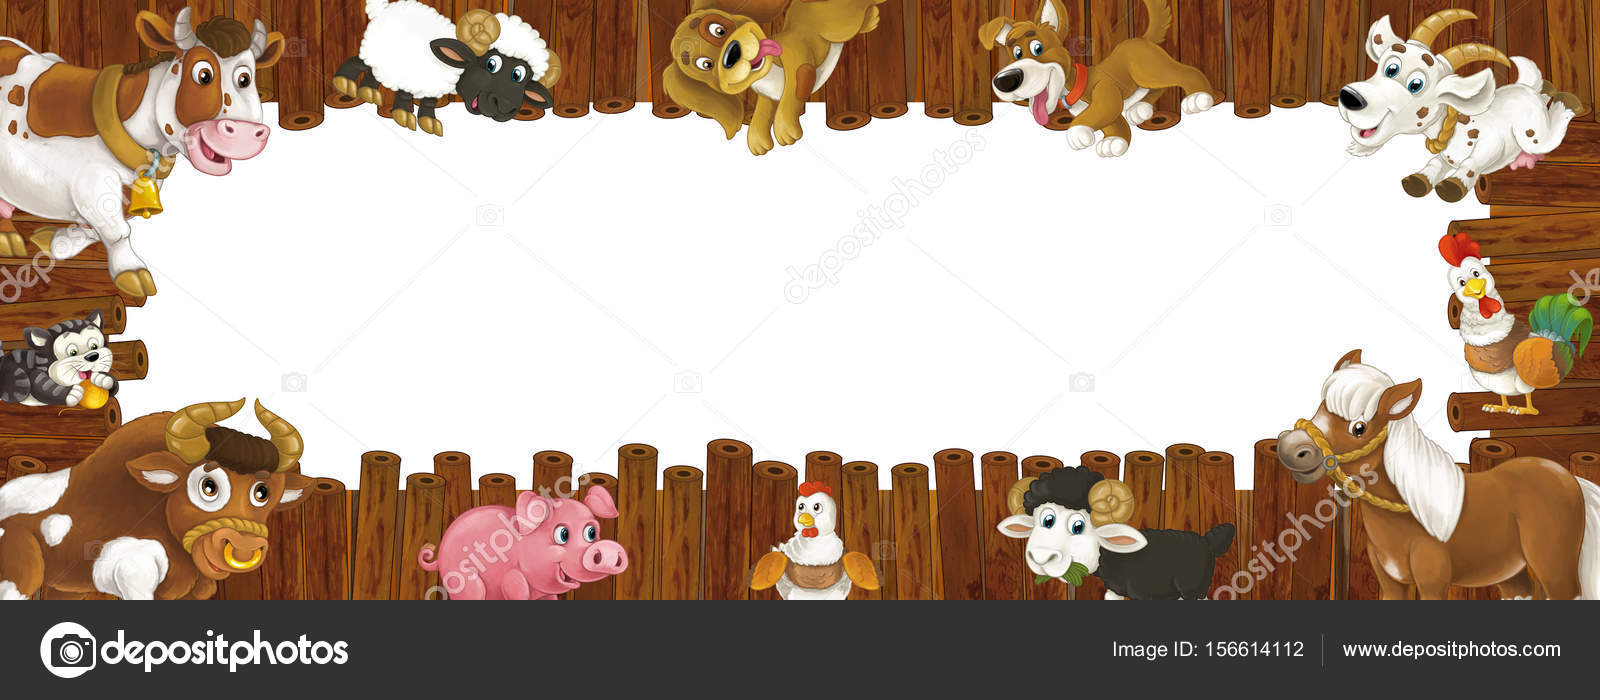 Wooden Frame With Different Farm Animals Stock Photo by ©illustrator_hft  156614112